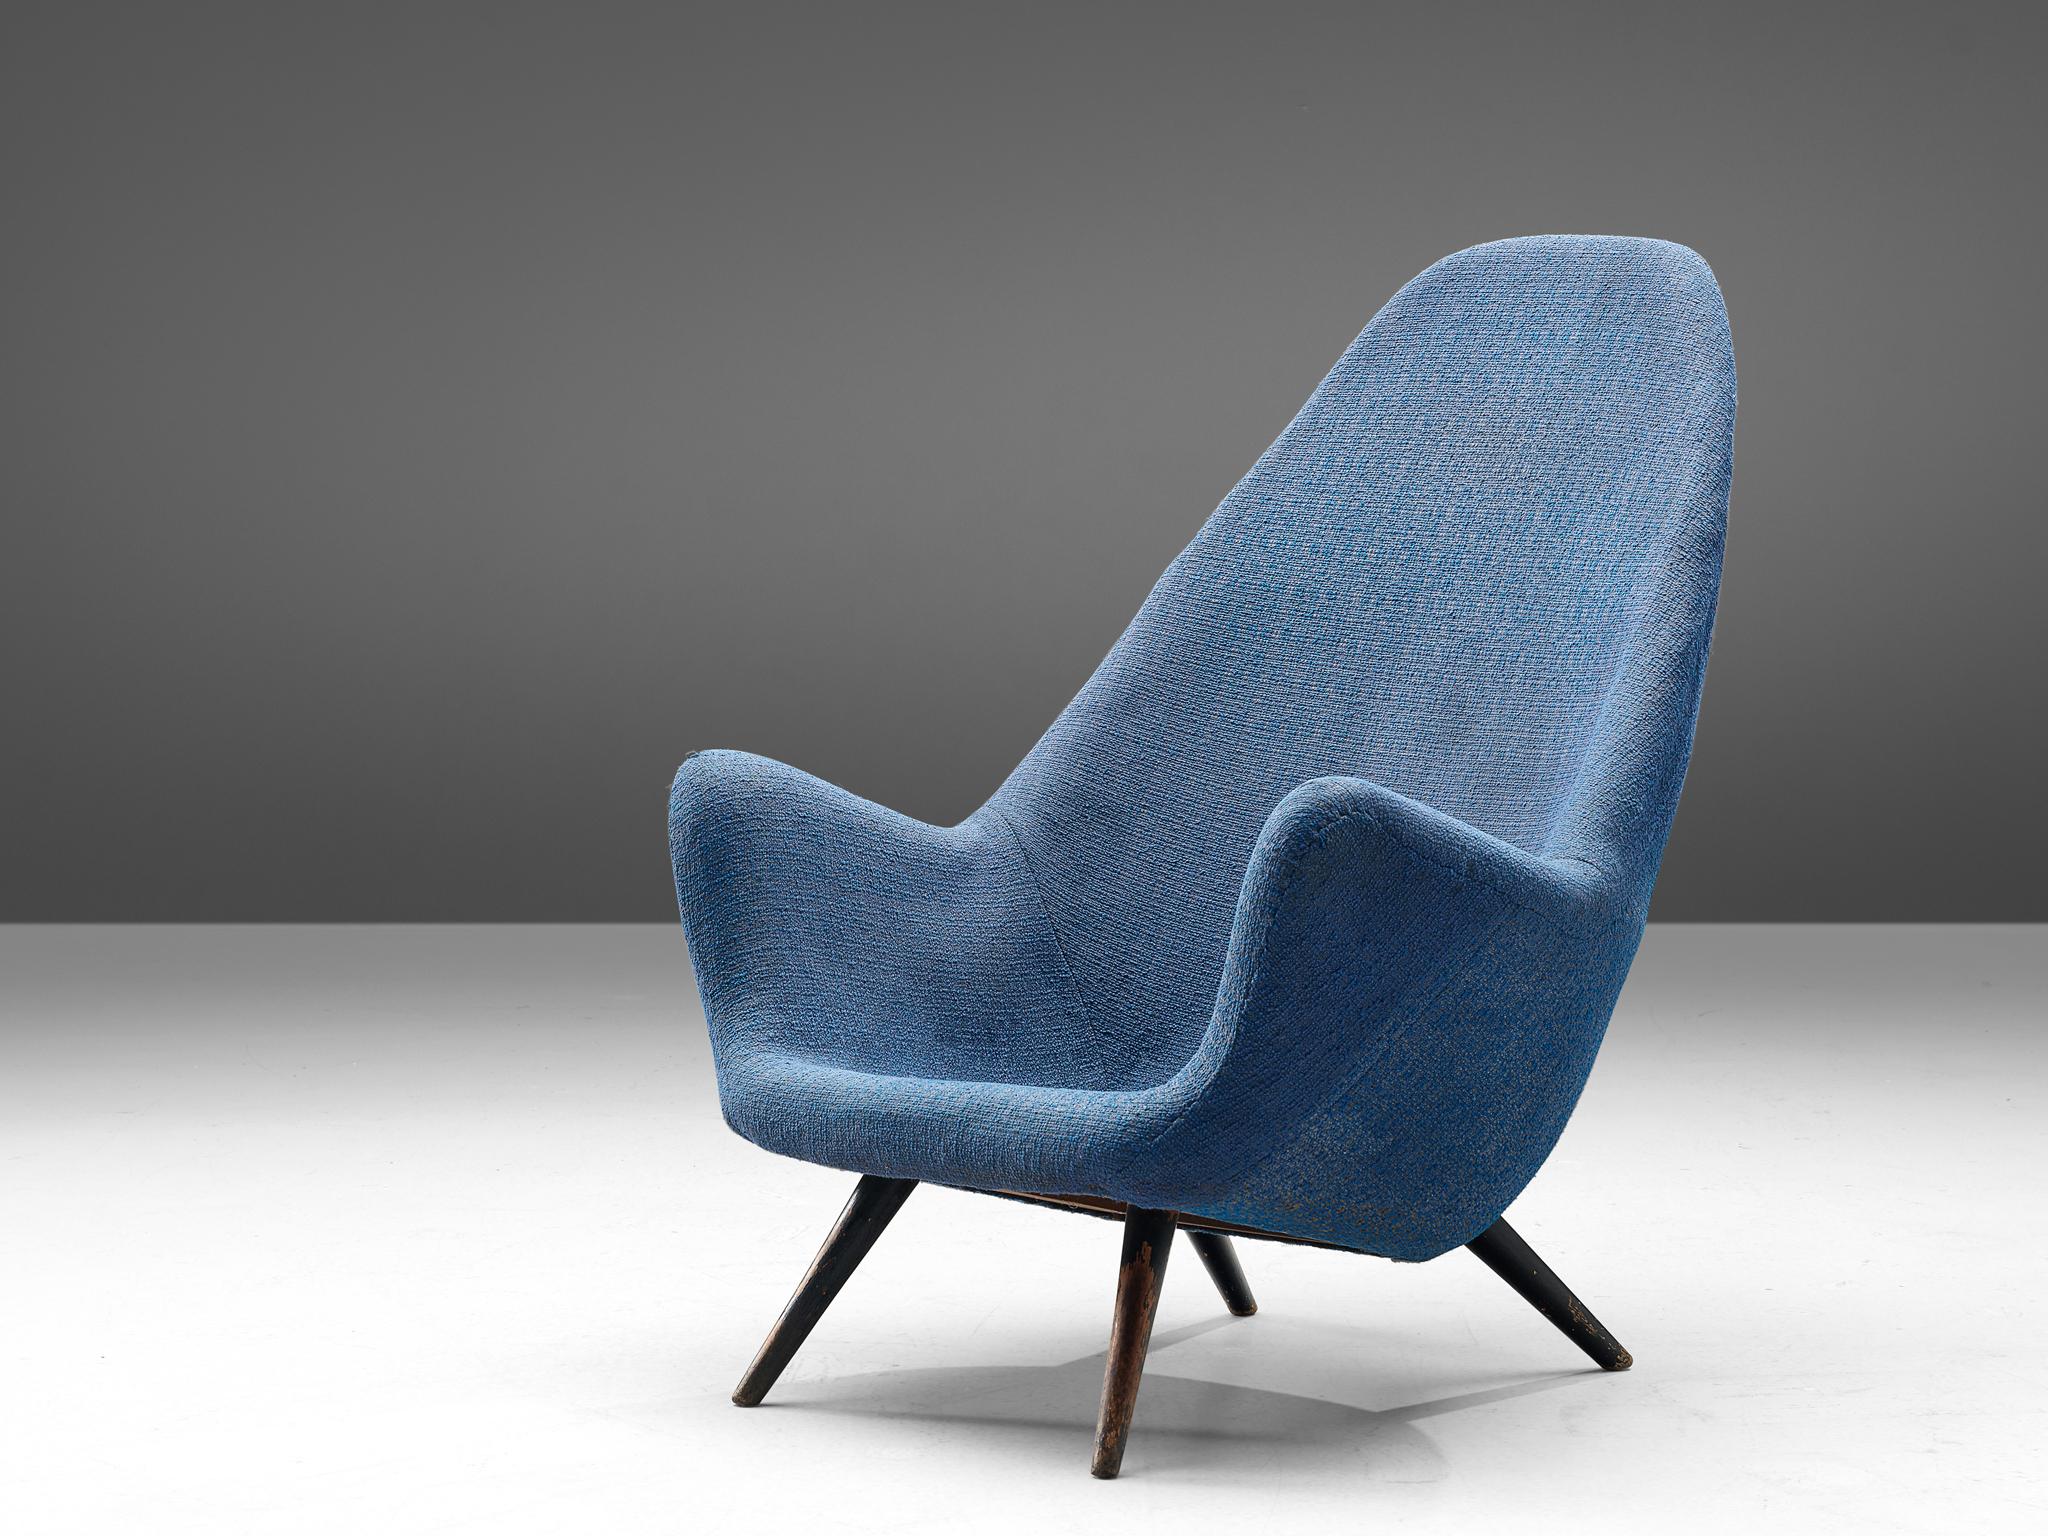 Lounge chair, fabric and beech, Denmark, 1950s

A Scandinavian Modern lounge chair with an exceptional high back. The curvaceous design offer a striking organic silhouette from every angle. The seat is tilted which creates beautiful lines.